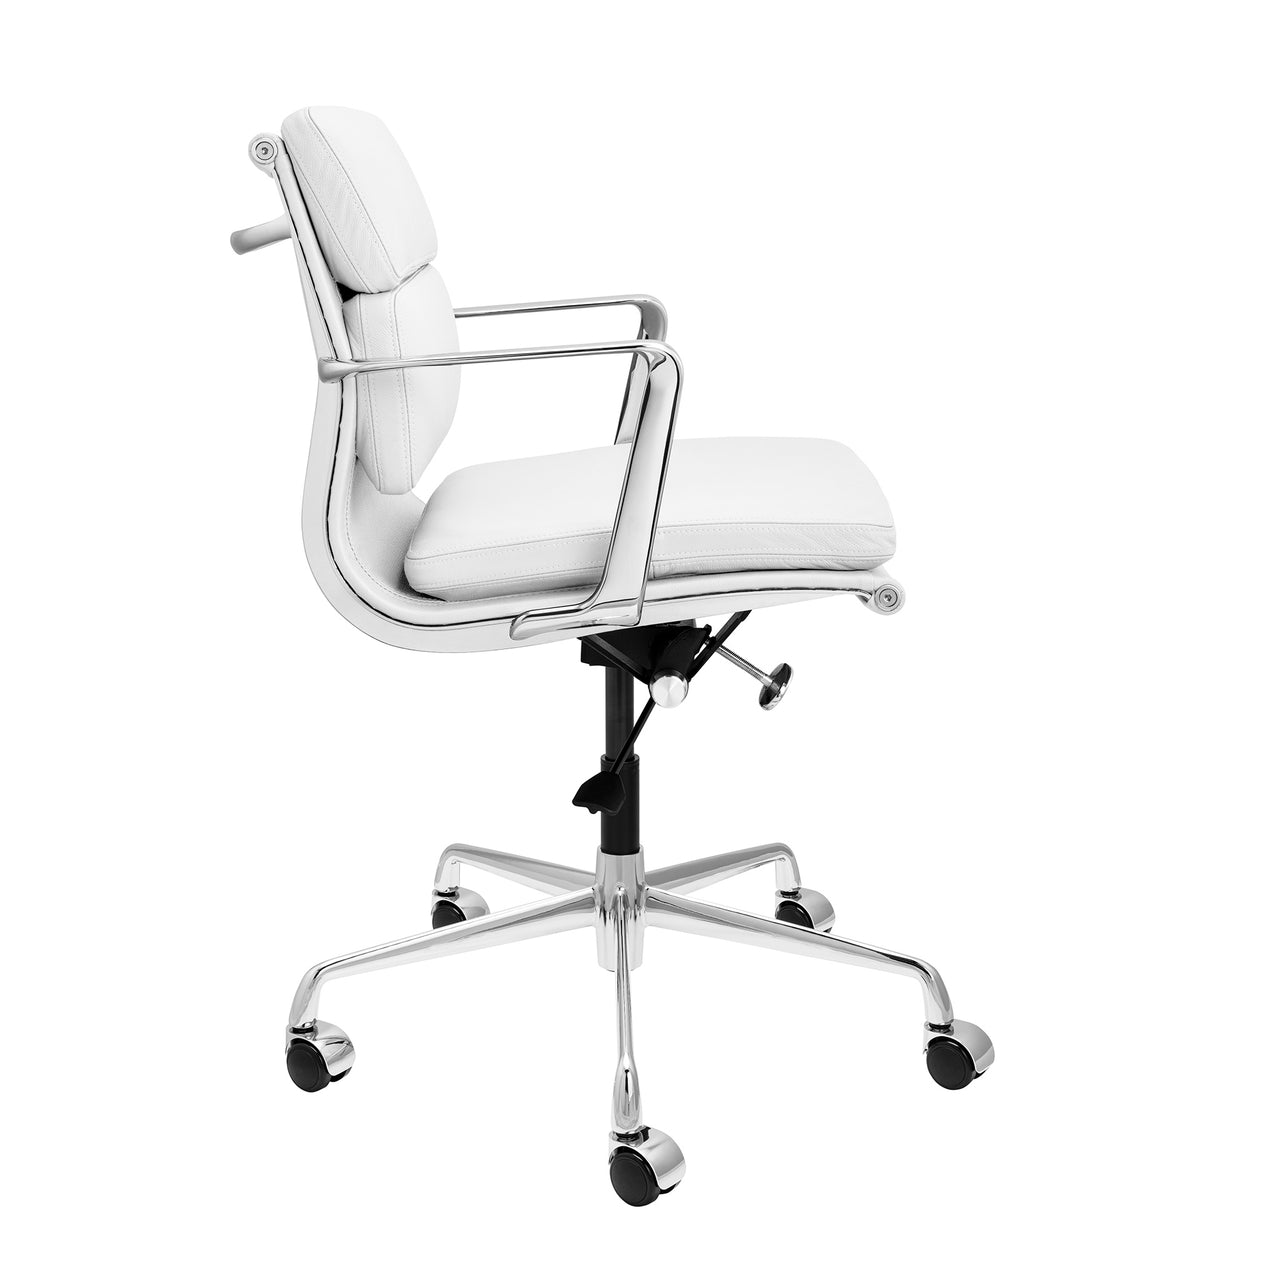 Pro Soft Pad Management Chair (White Italian Leather)